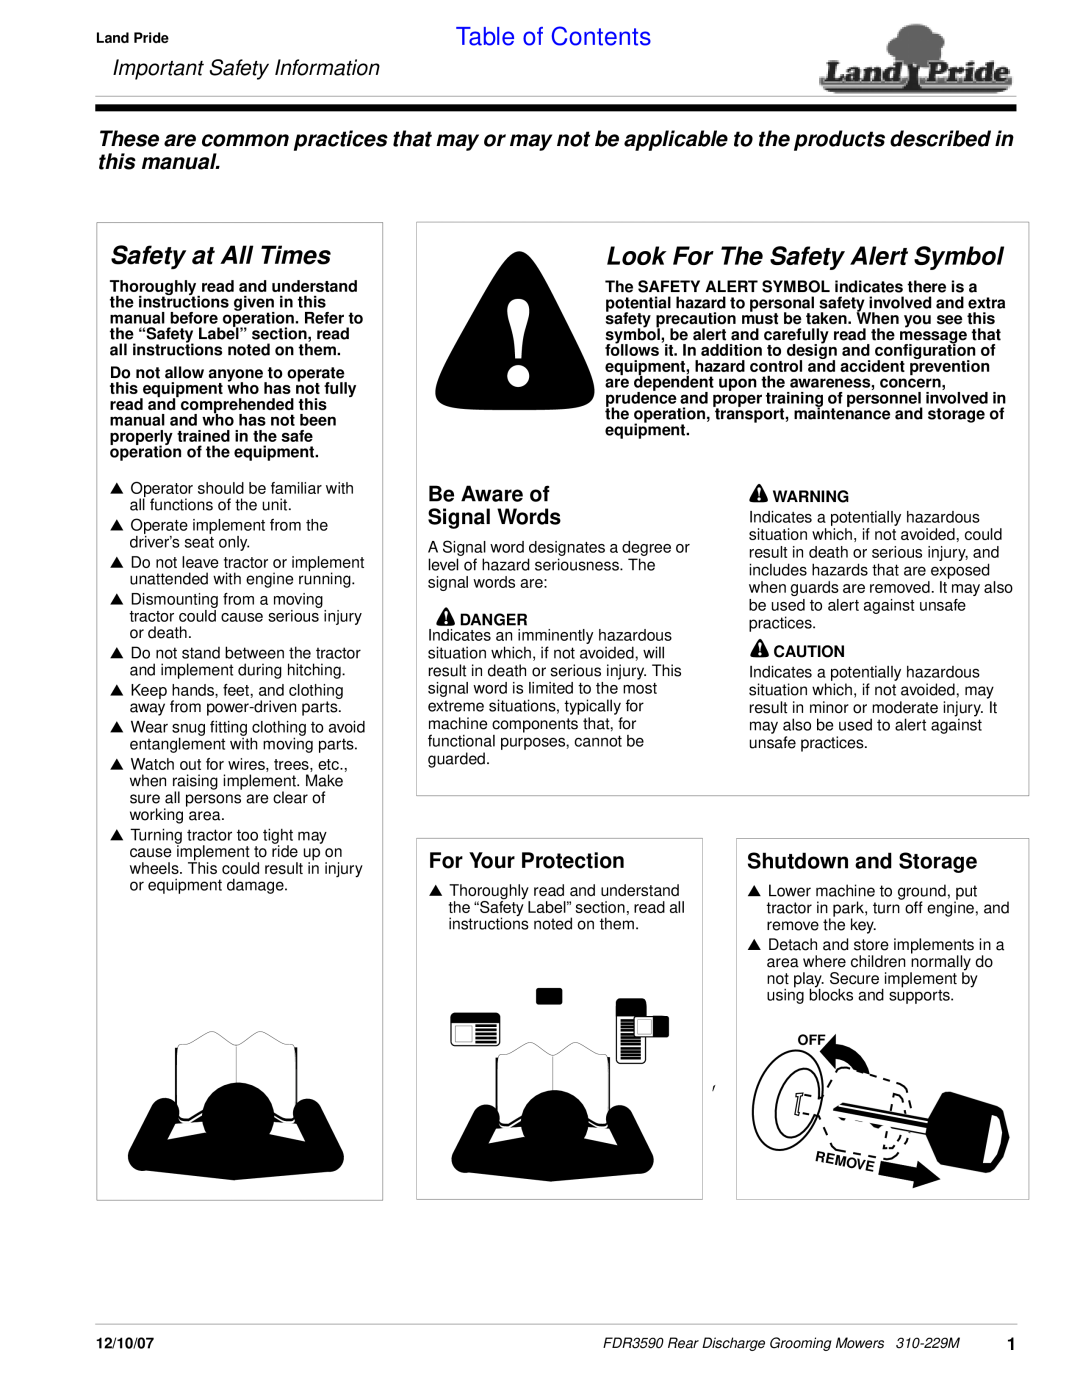 Land Pride FDR3590 Safety at All Times, Look For The Safety Alert Symbol, Important Safety Information, Table of Contents 